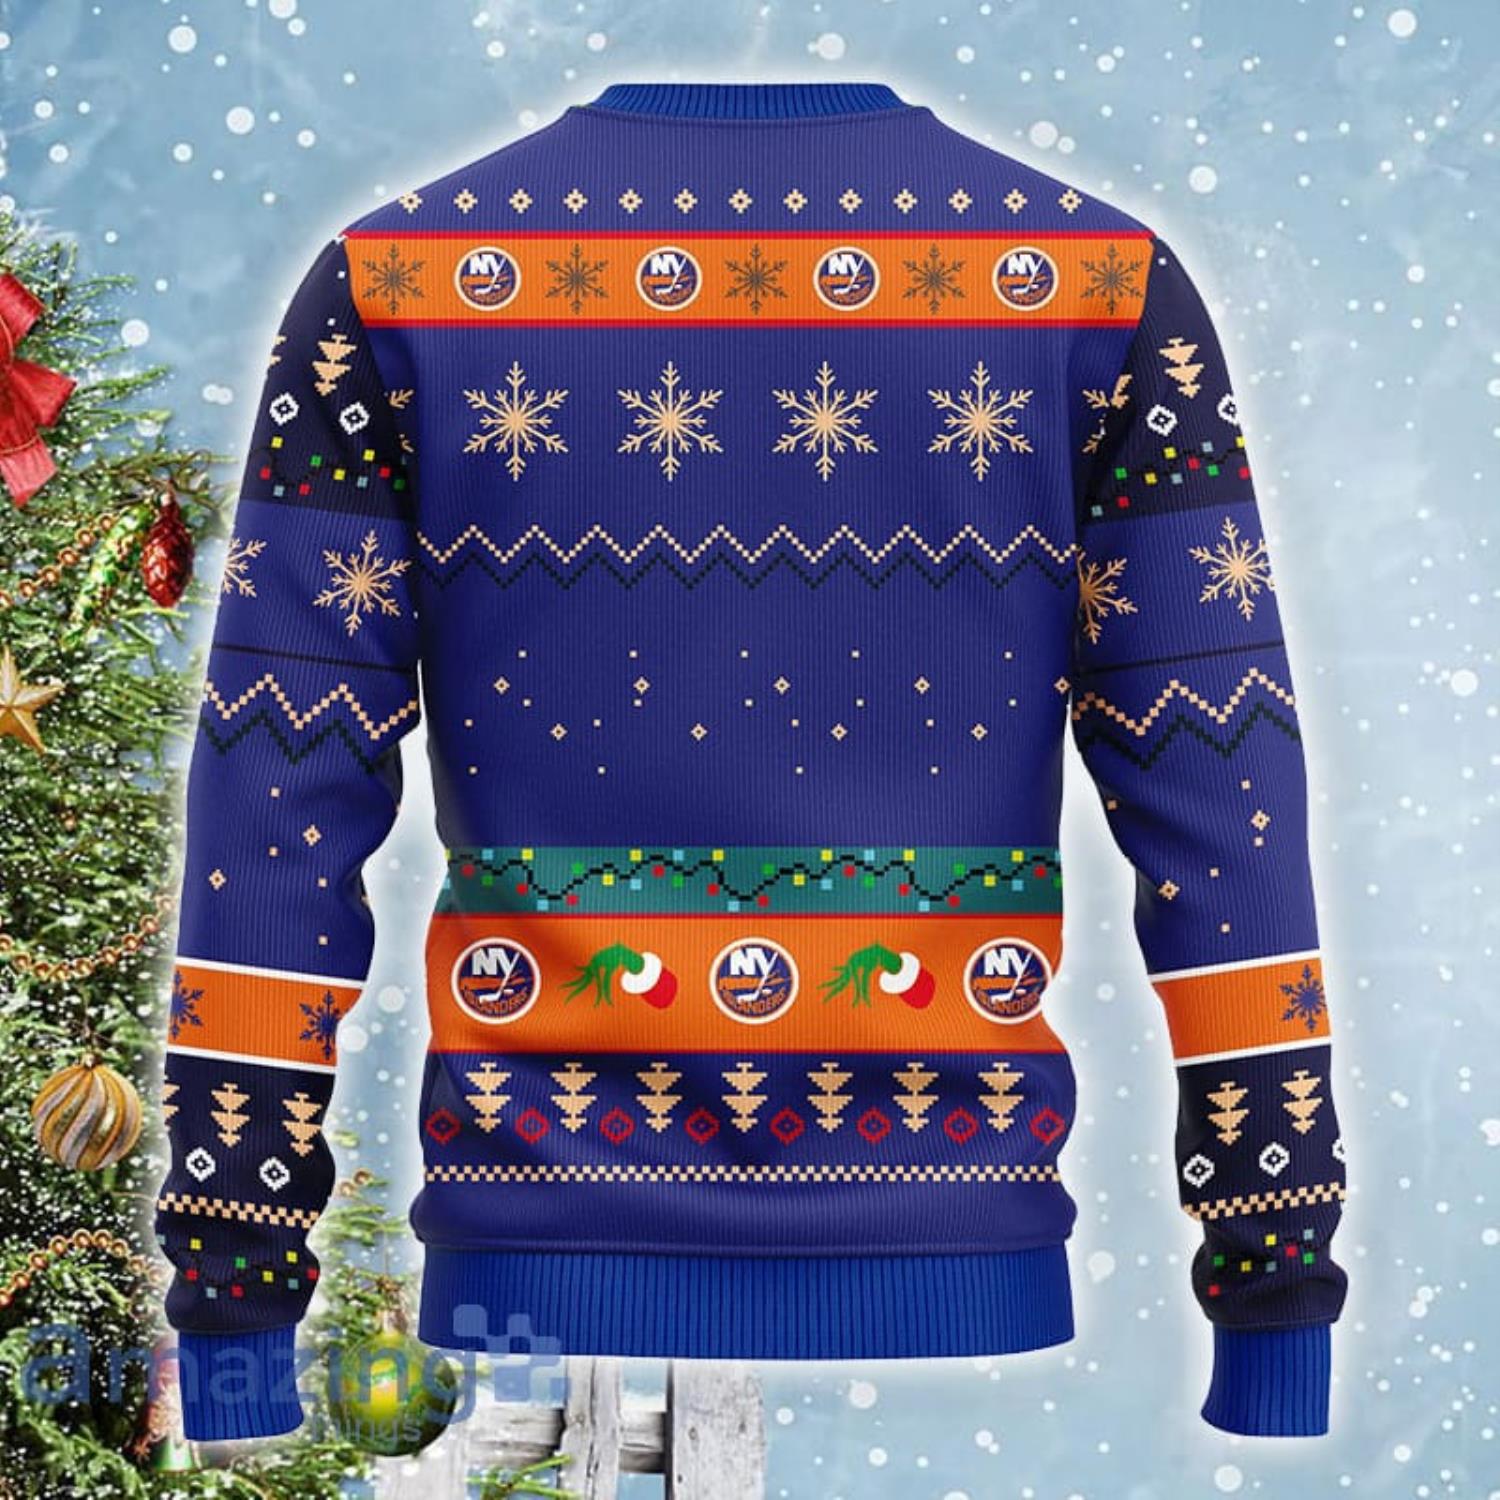 NHL New York Islanders Custom Name Number Cute 3D Ugly Christmas Sweater  Christmas Gift Ideas For Fans - Freedomdesign